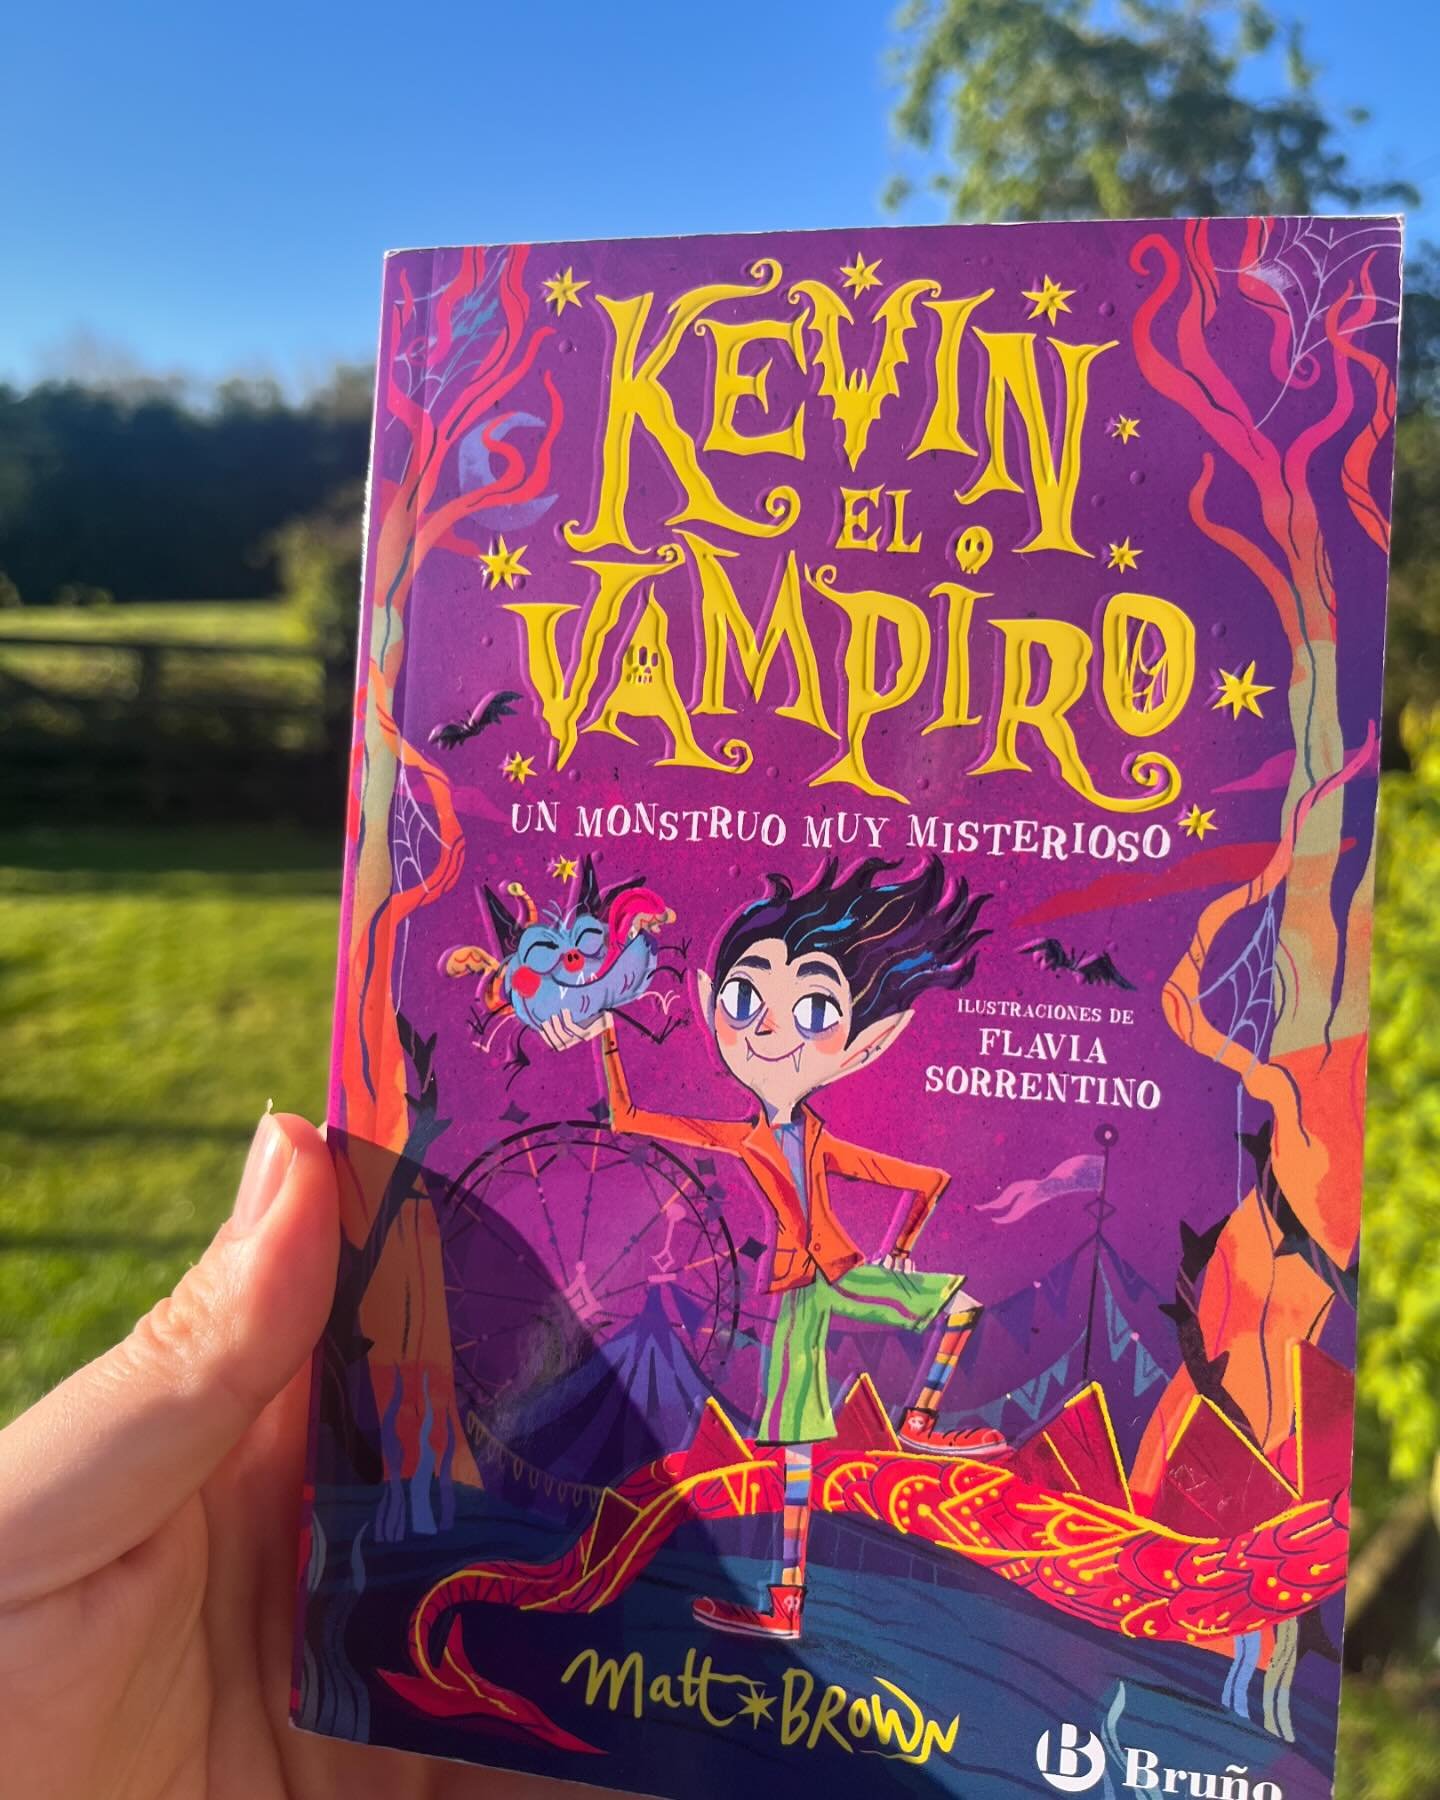 The Spanish 🇪🇸 edition of KEVIN THE VAMPIRE sparkling in the sunlight. And looking GREAT on my foreign edition shelf sandwiched between Dutch 🇳🇱 Kevin and Turkish 🇹🇷 Compton